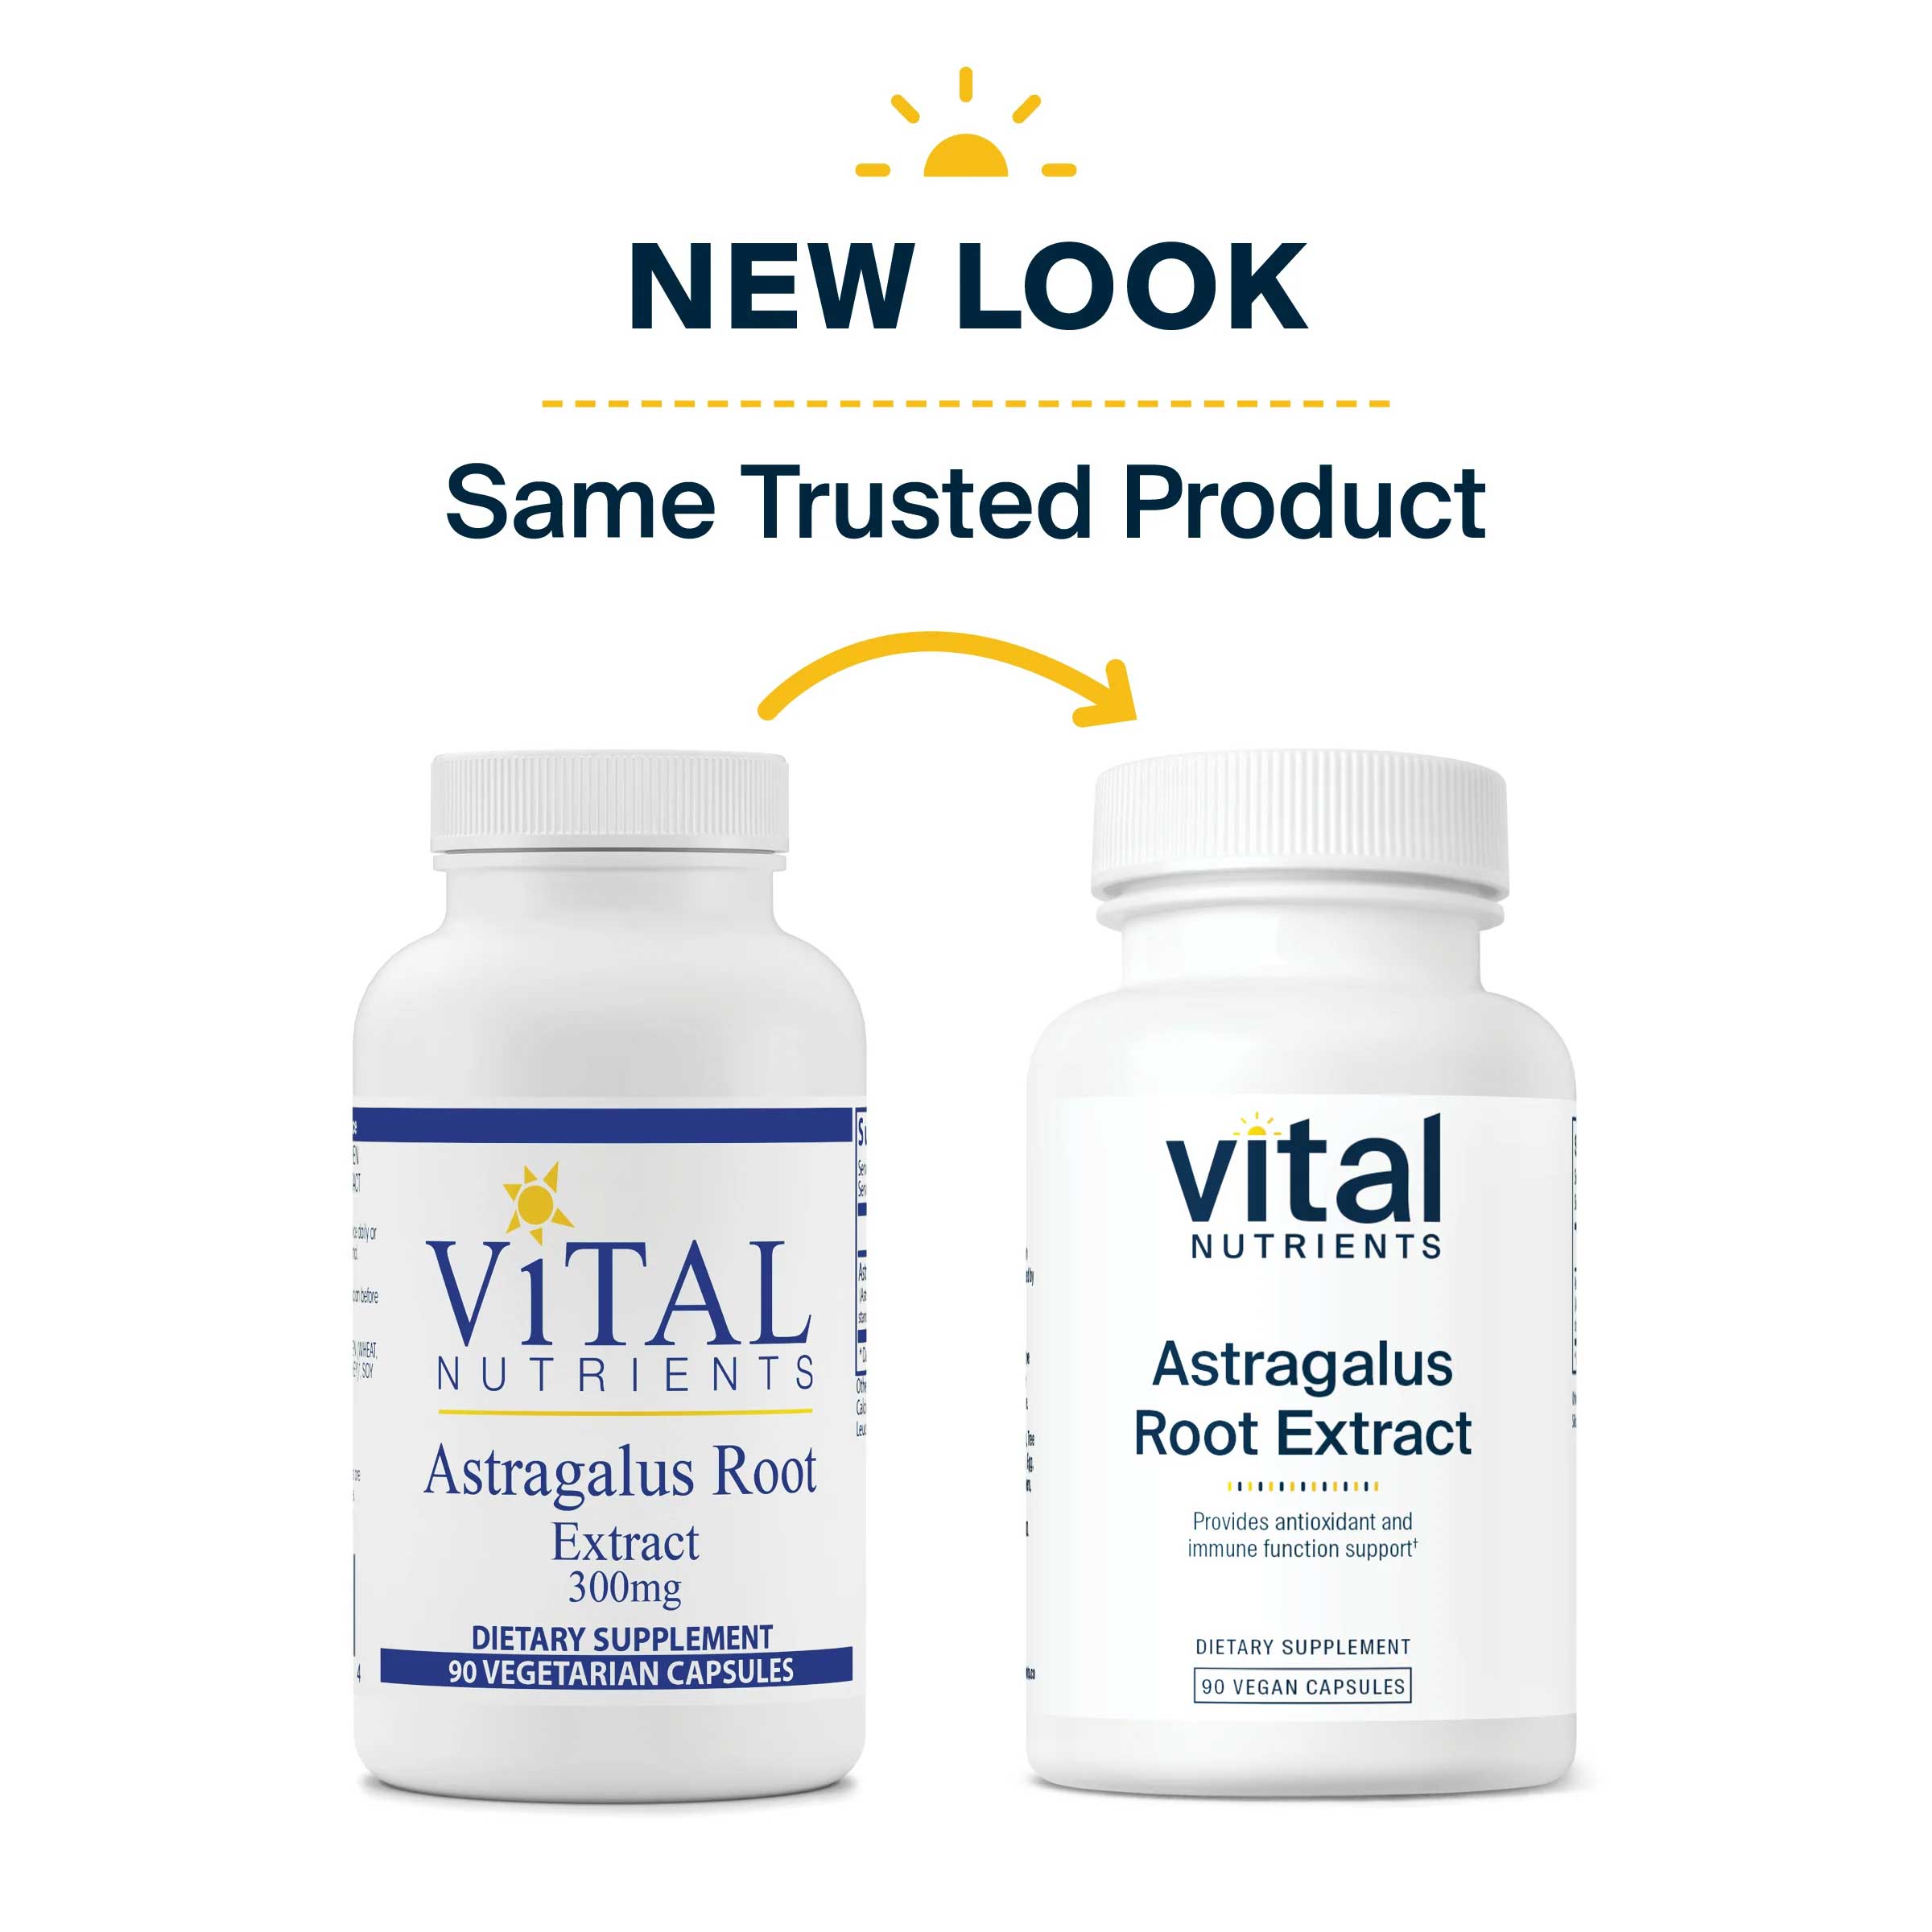 Vital Nutrients Astragalus Root Extract 300mg New Look